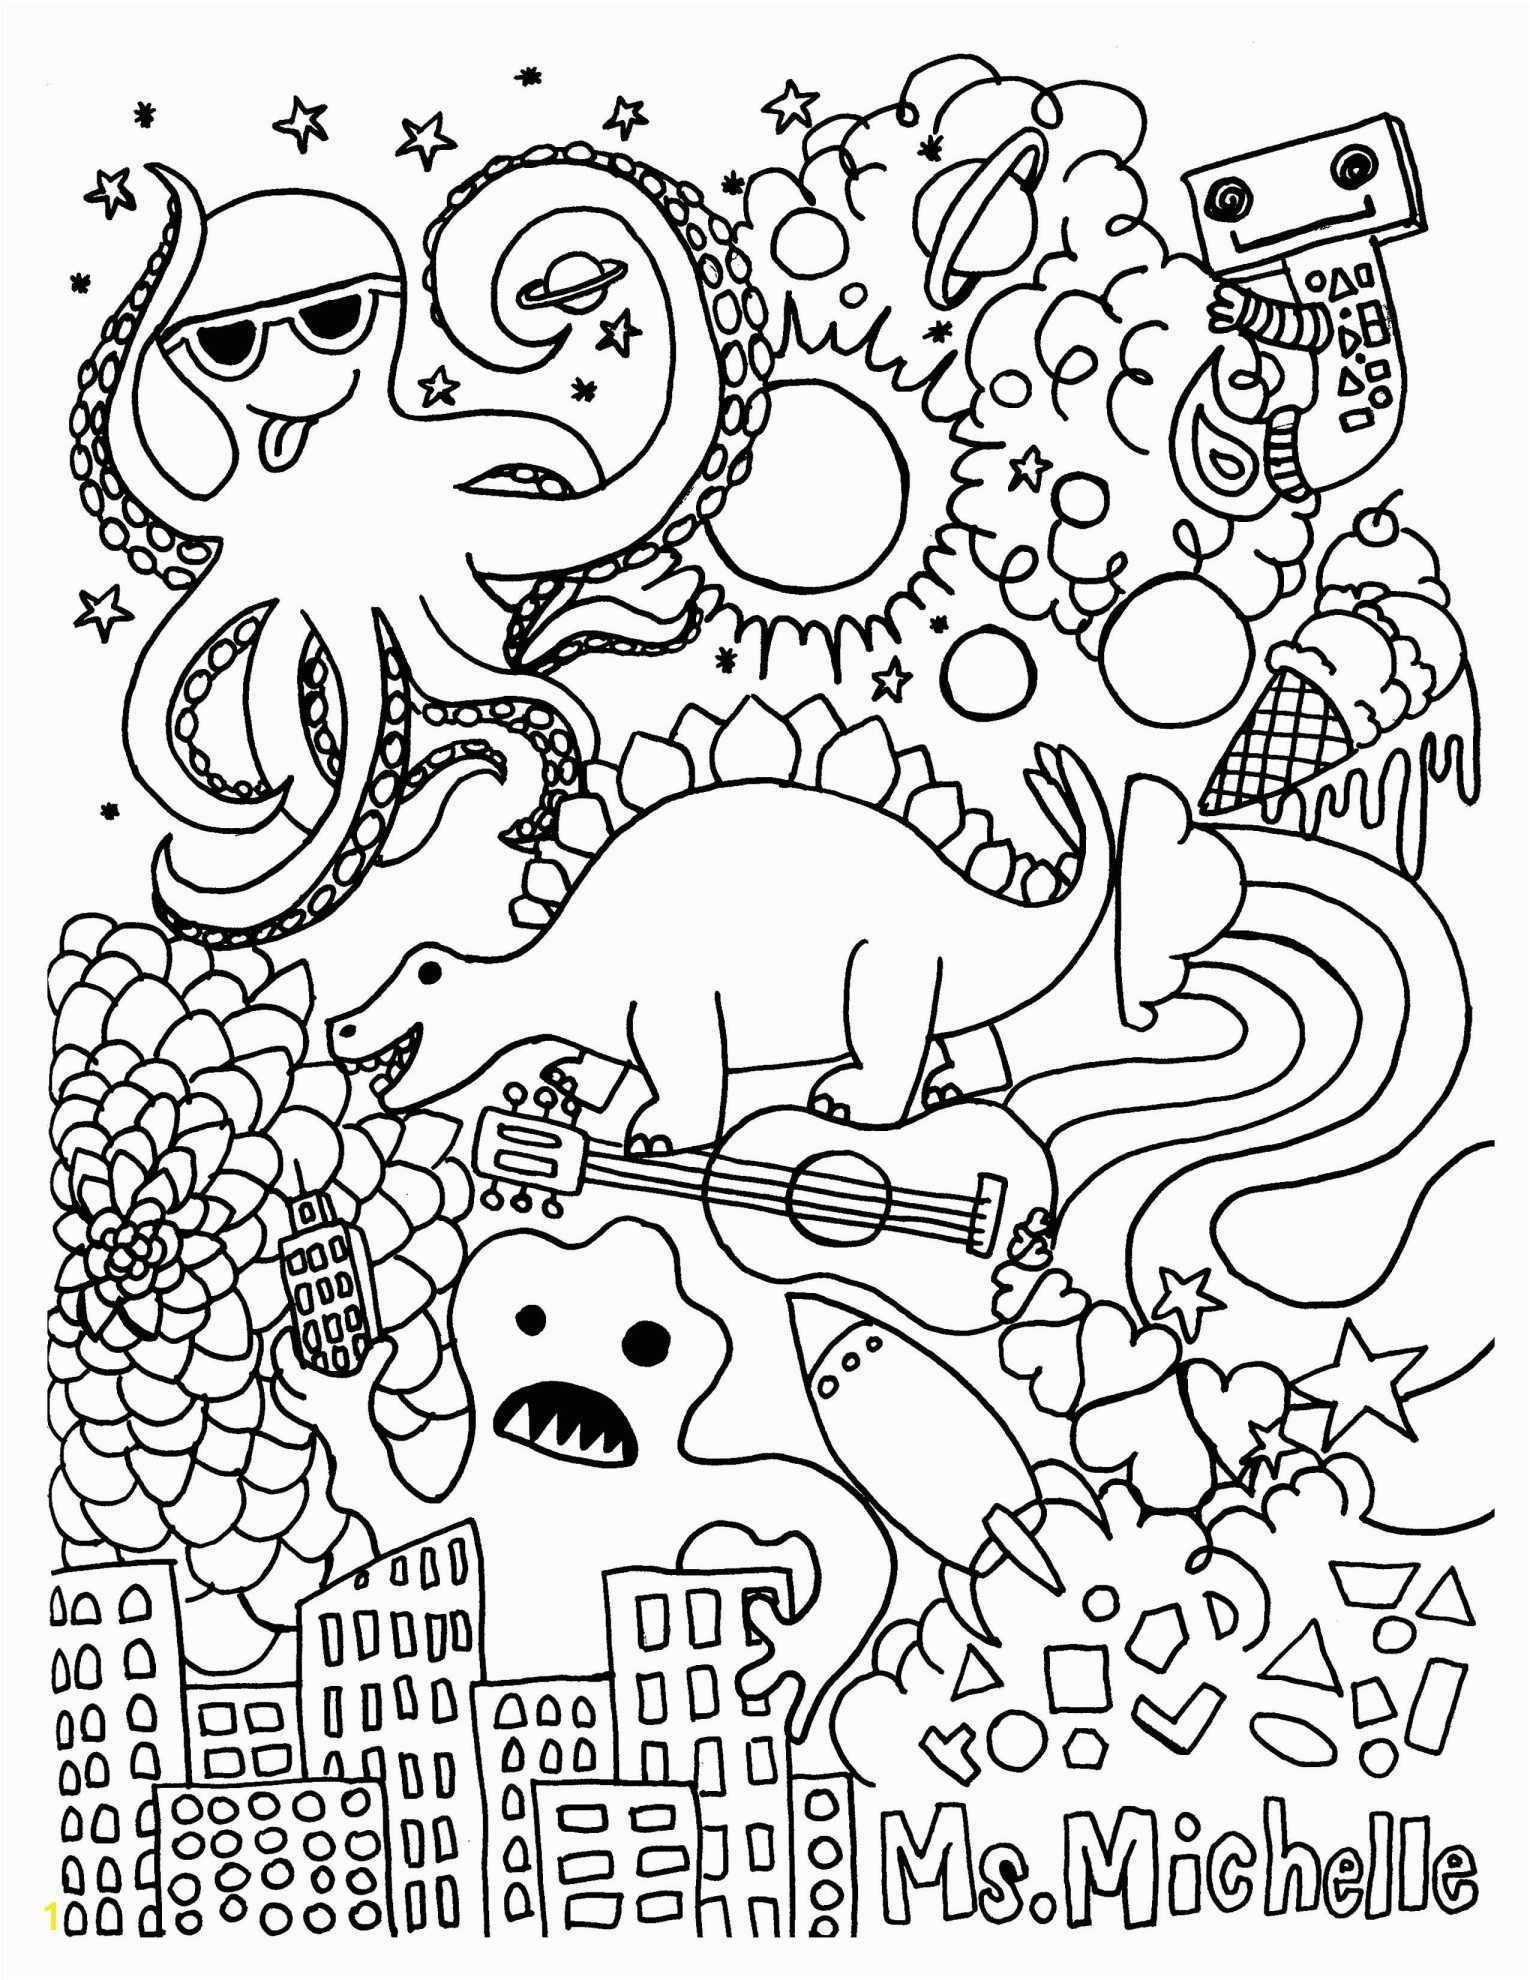 Www.coloring-pages-kids.com Grill Coloring Page Coloring Pages Coloring Pages